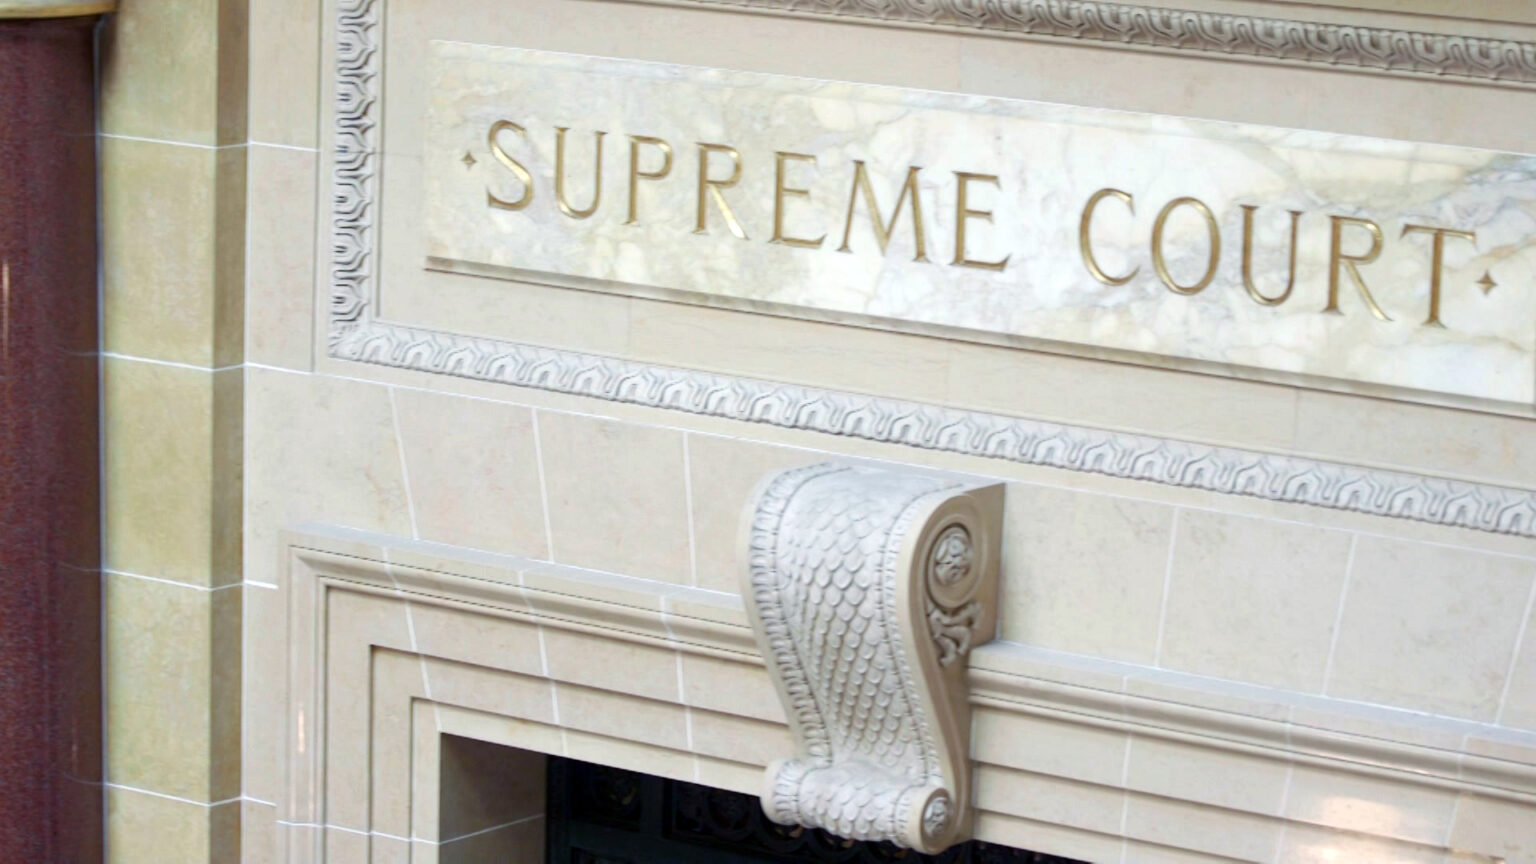 The words Supreme Court are engraved in a marble sign set into masonry above a door pediment.